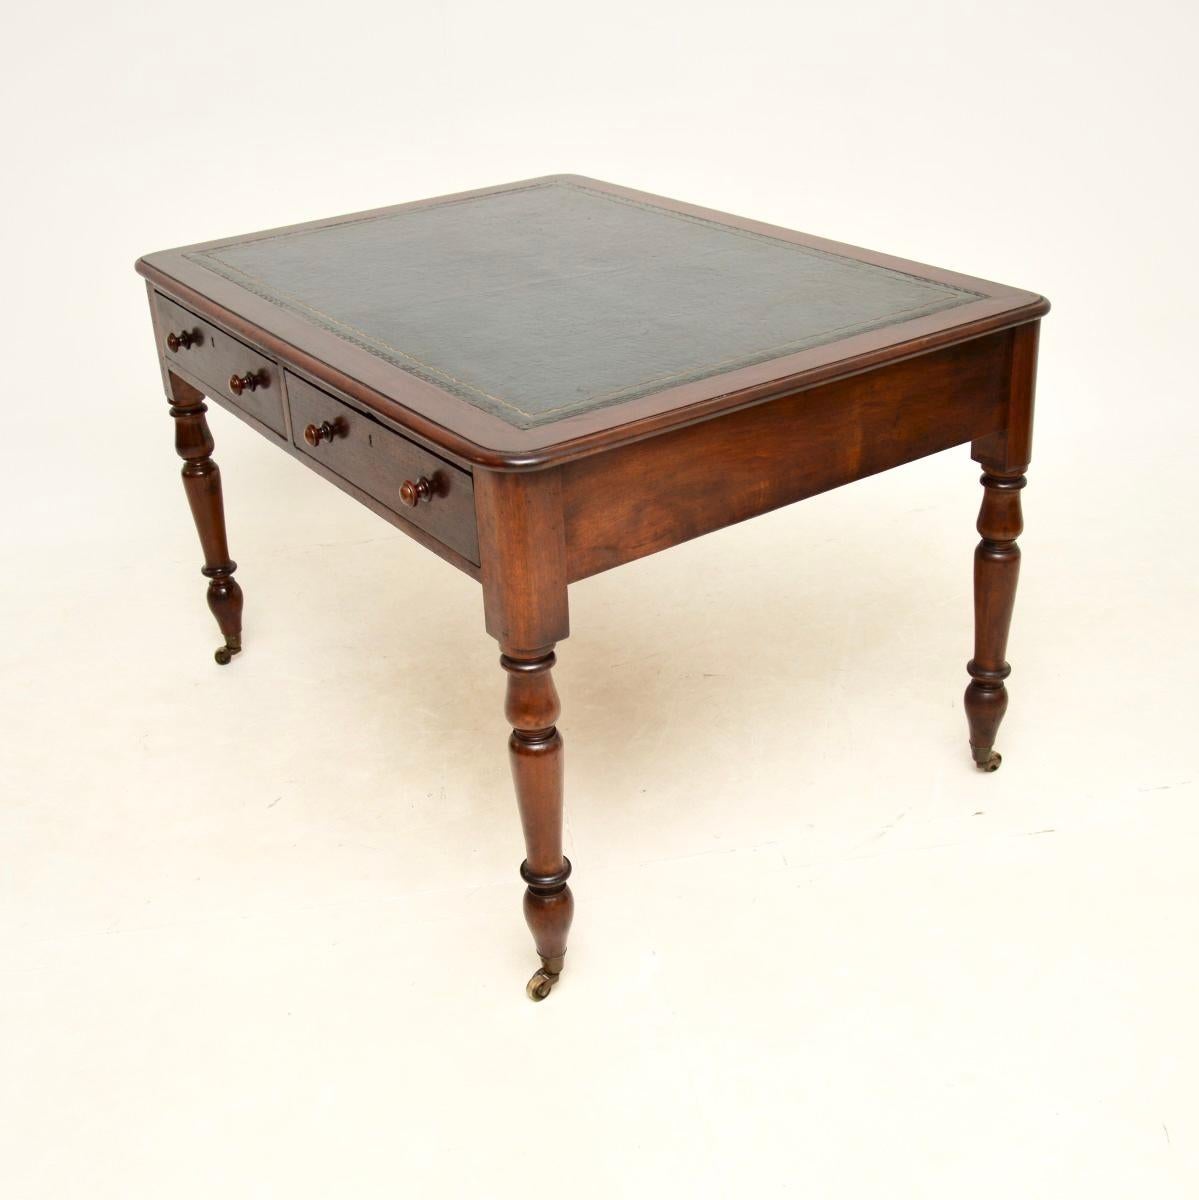 British Antique Victorian Leather Top Partners Desk / Writing Table For Sale